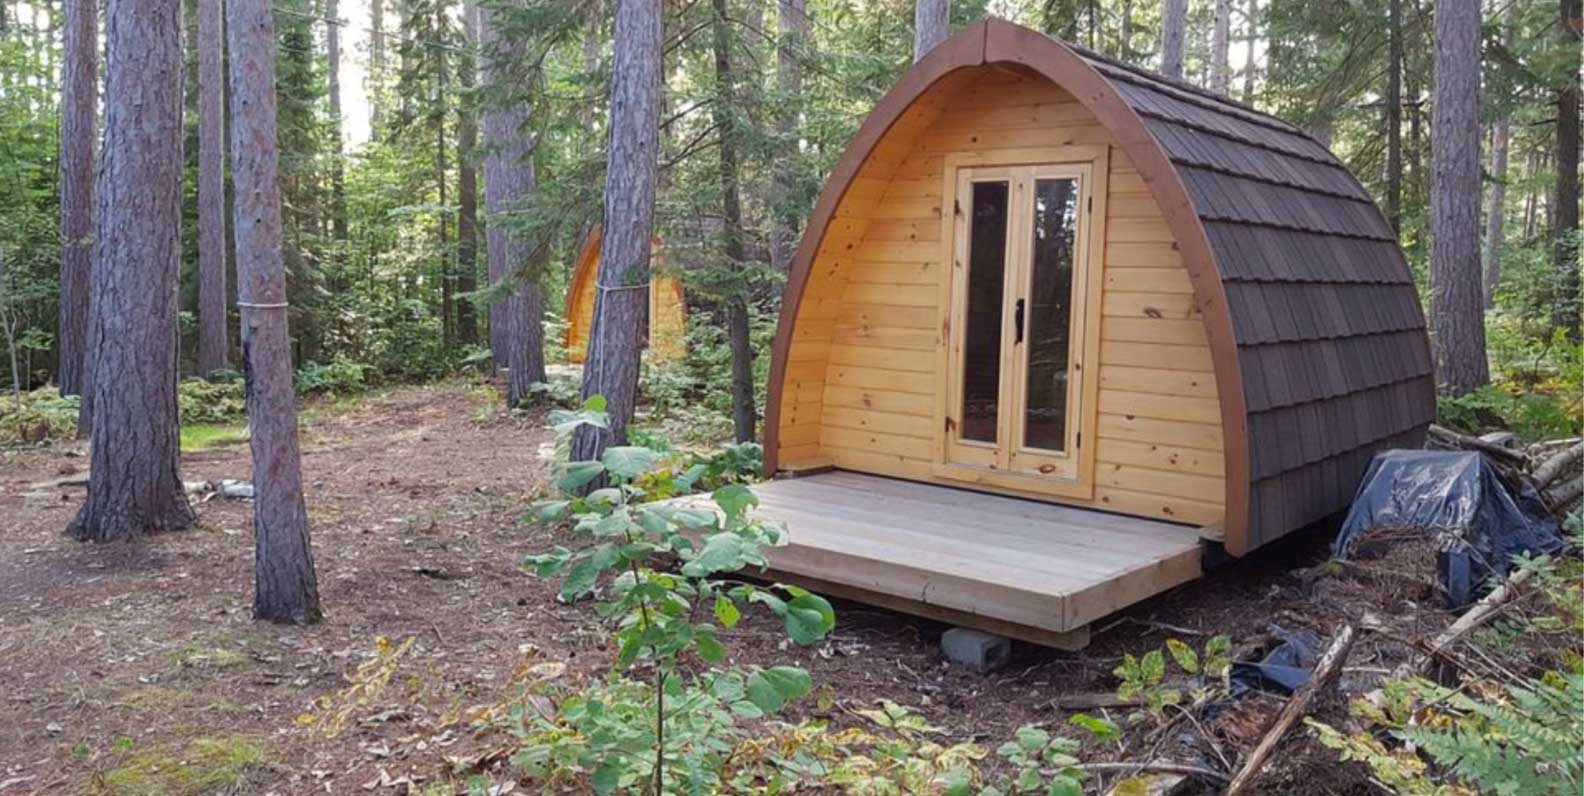 Case Study: What Type of Roof is Best for Cabins and Lodges?